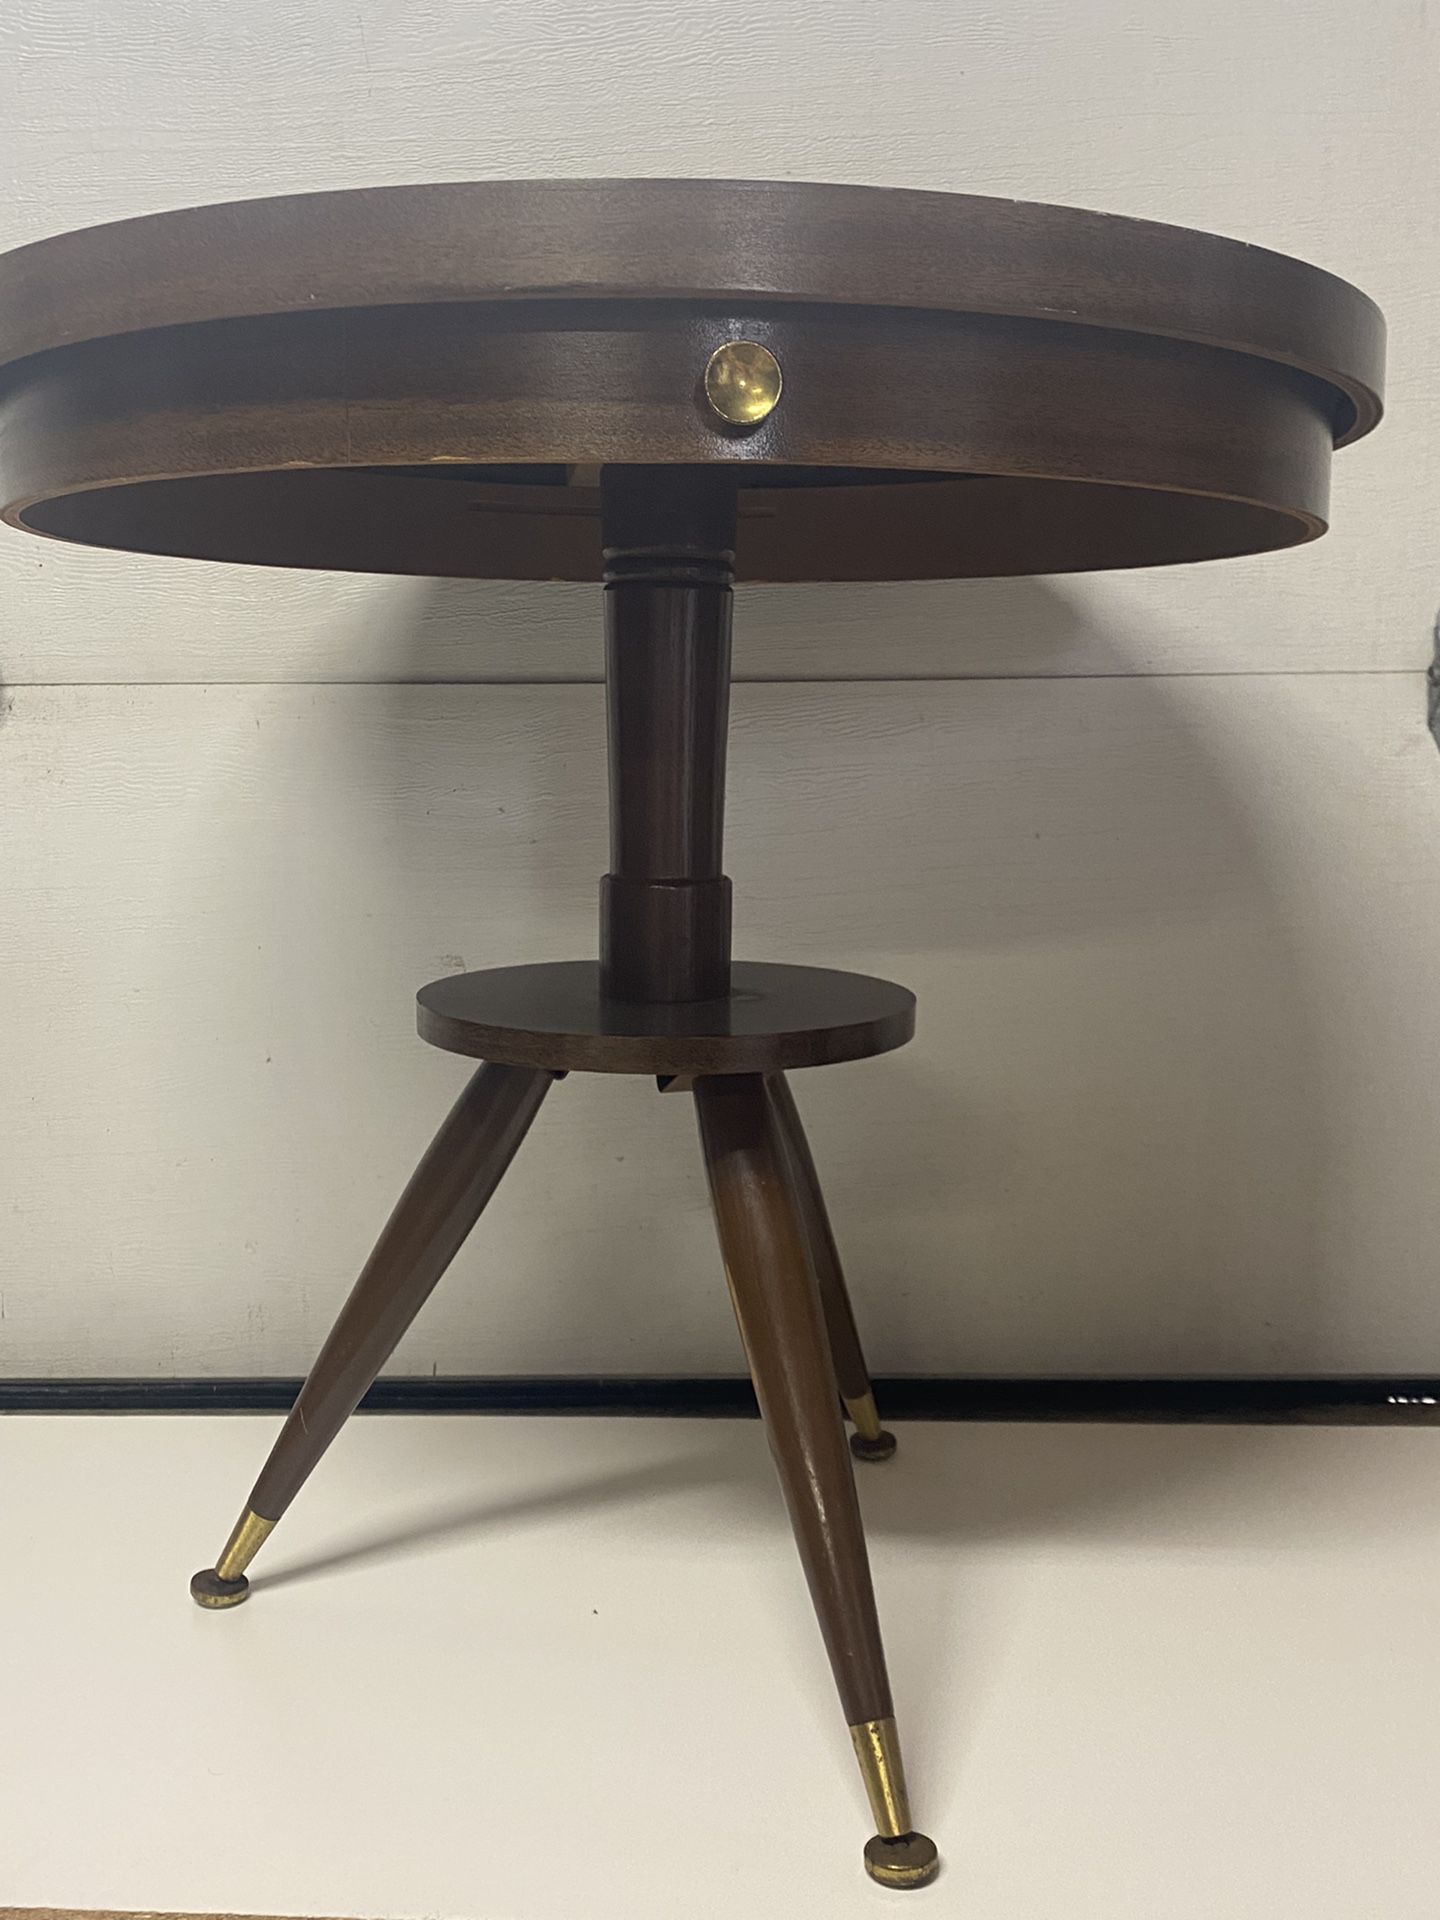 MCM Round Table Tripod Legs Gold Accents 